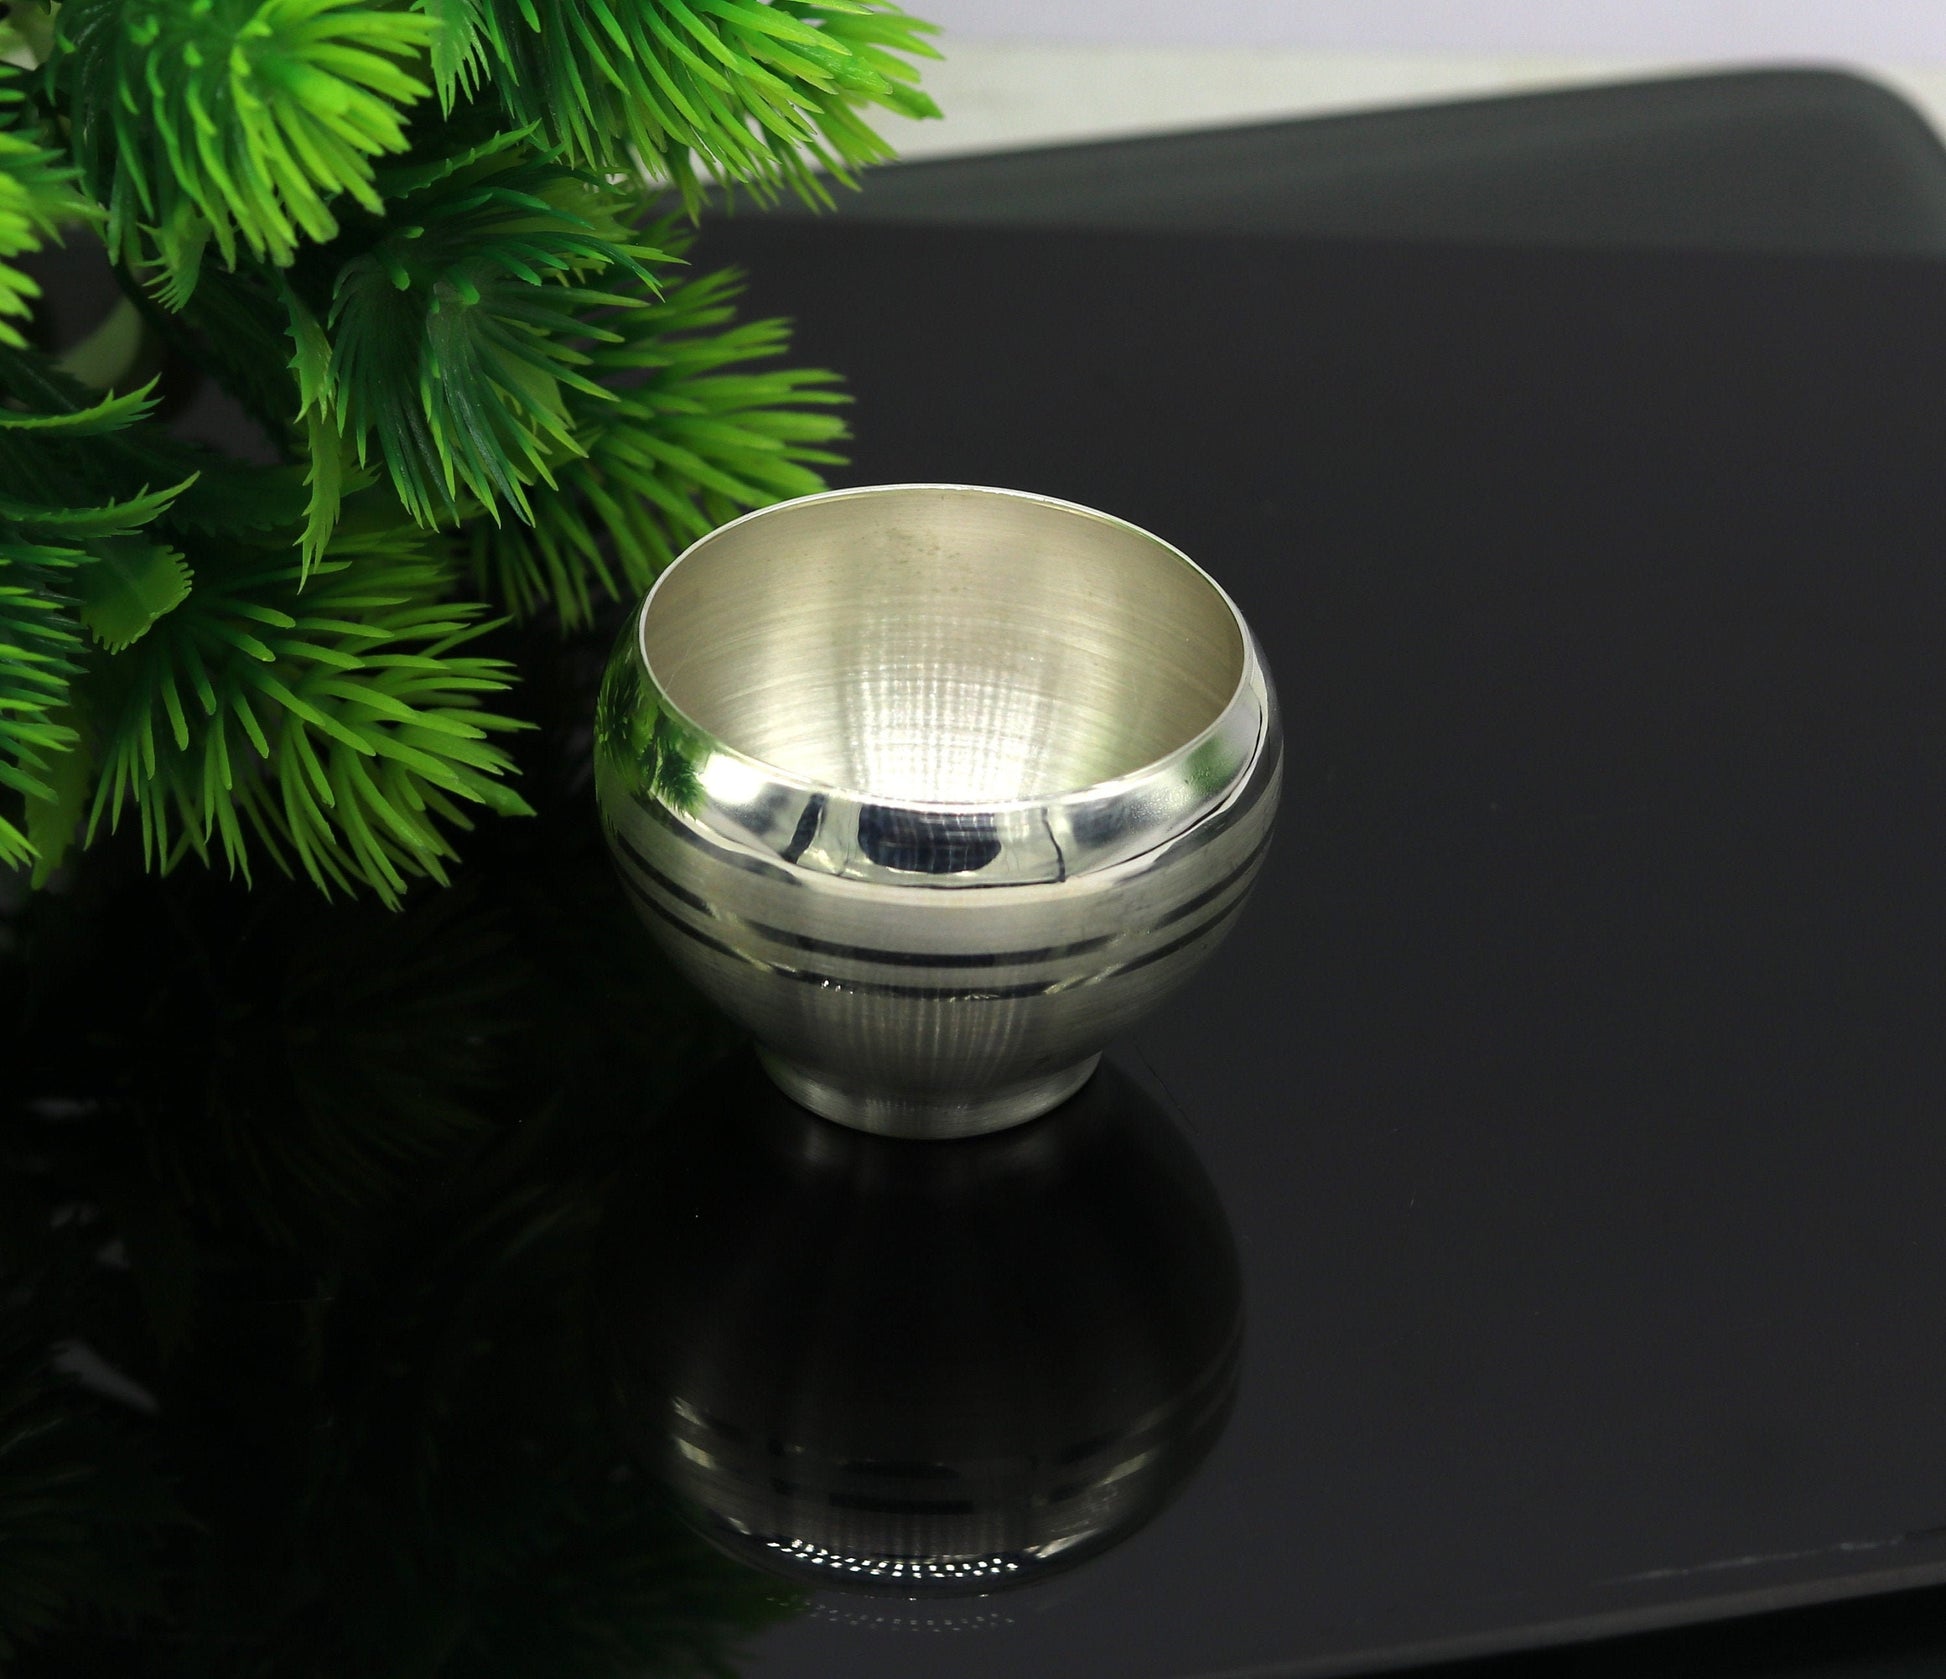 999 fine silver handmade small silver utensils bowl/tumbler silver vessel, silver article puja art accessories, healthy family gift sv259 - TRIBAL ORNAMENTS